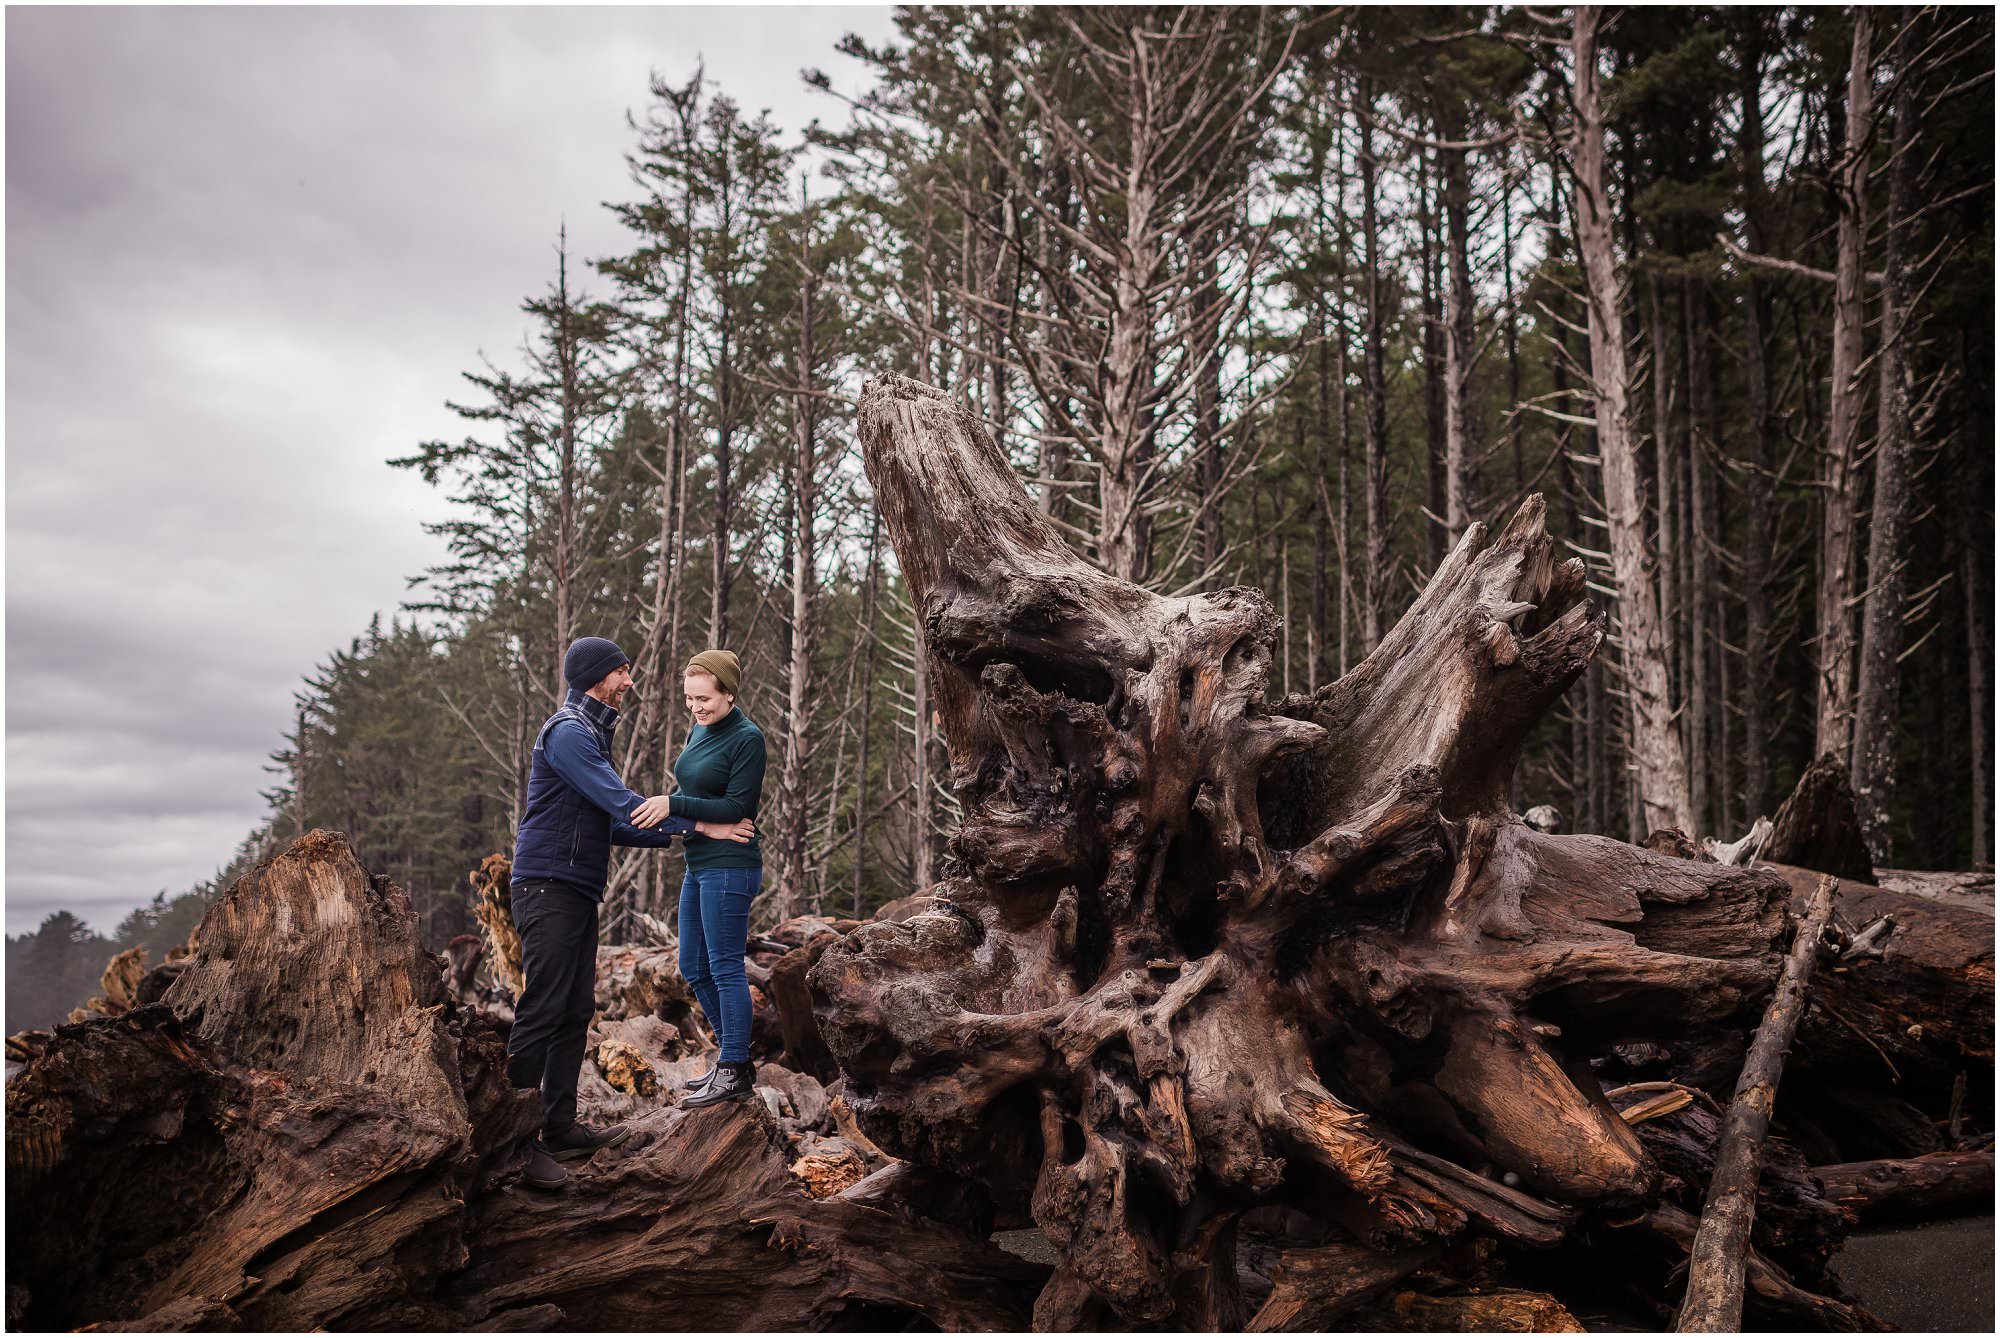  A couple exploring large broken trees on a beach in Washington State for their destination wedding.  